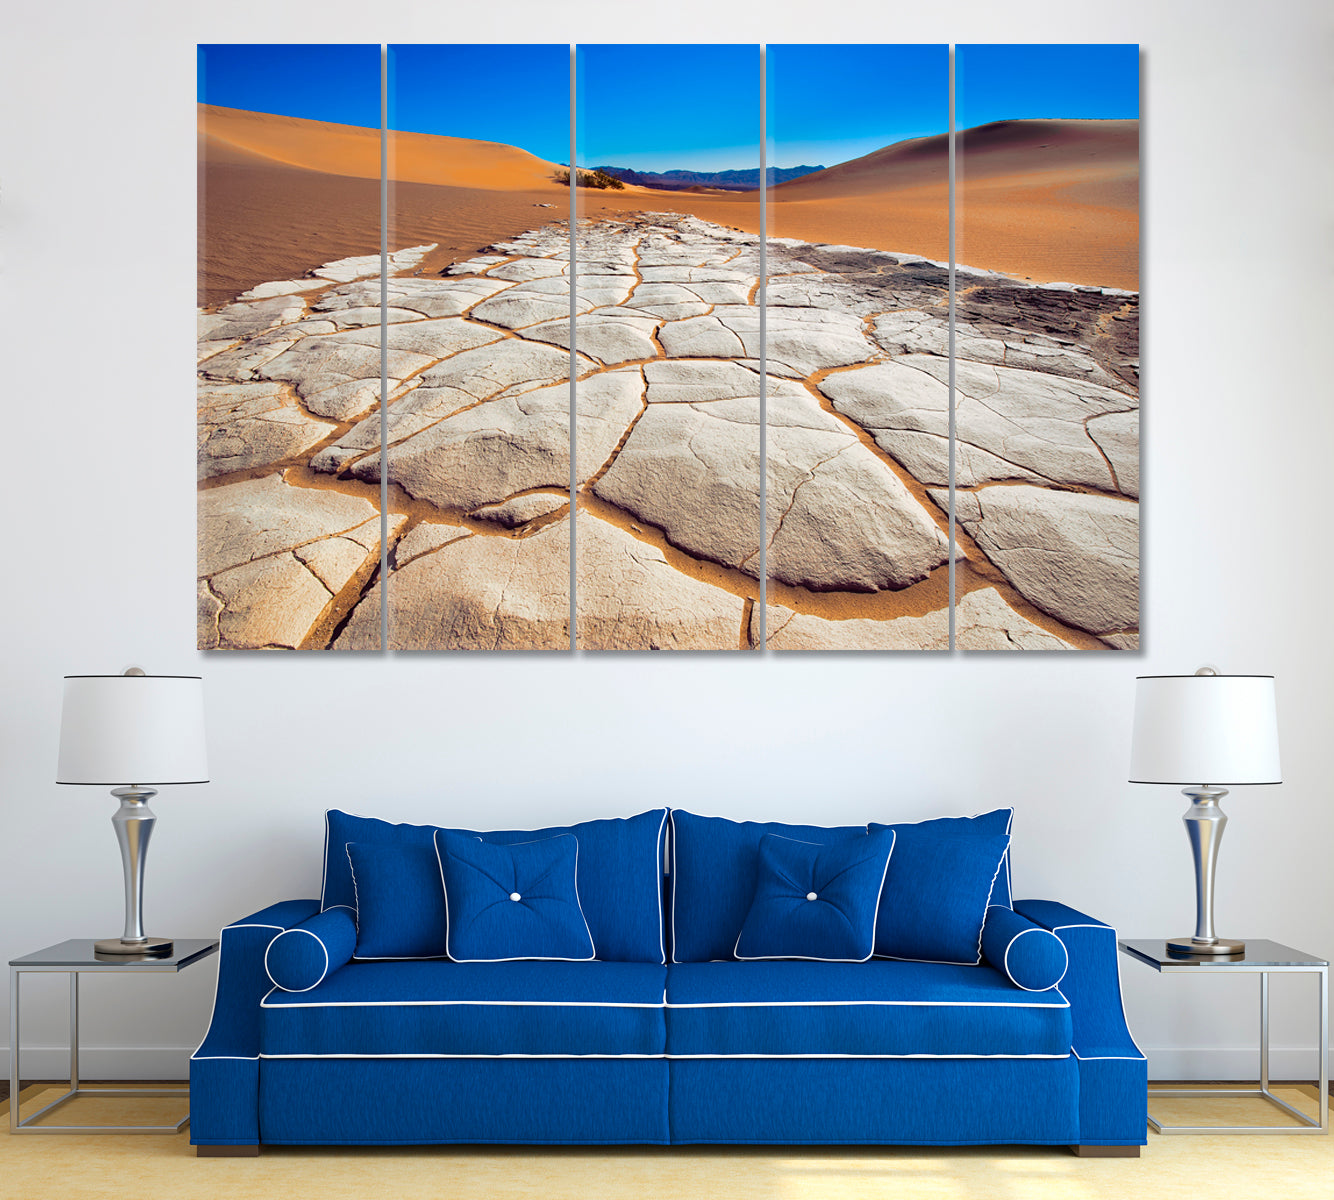 Death Valley Sand Dunes California Canvas Print ArtLexy 5 Panels 36"x24" inches 